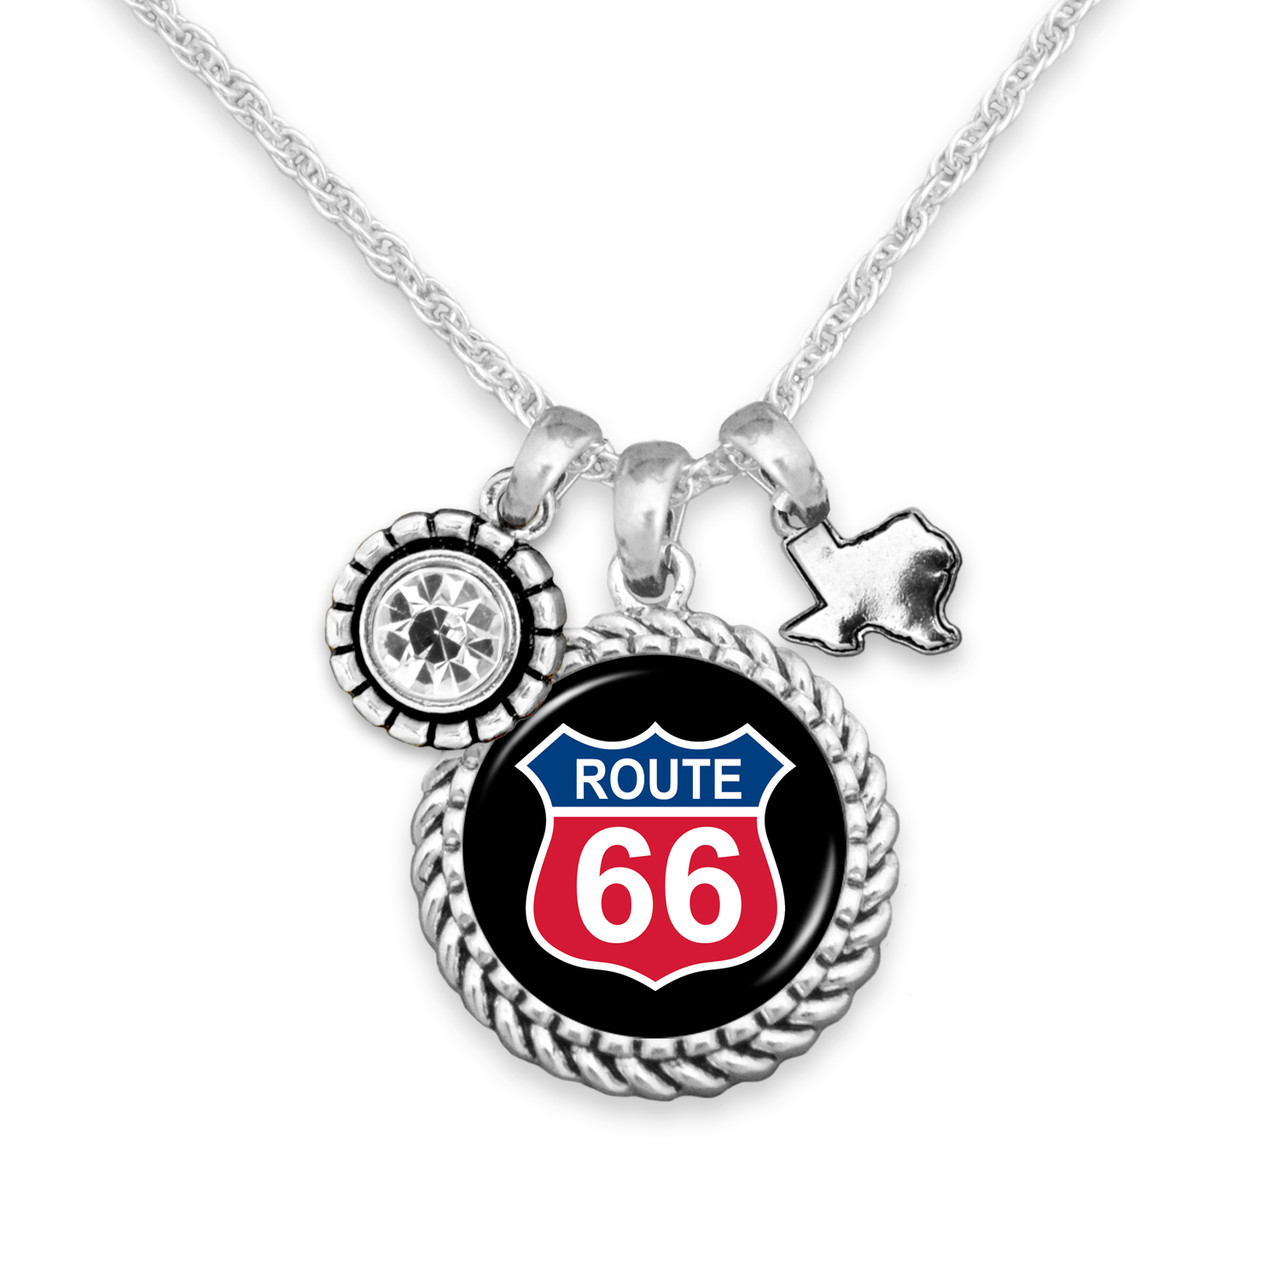 Route 66 Olivia Necklace - Texas